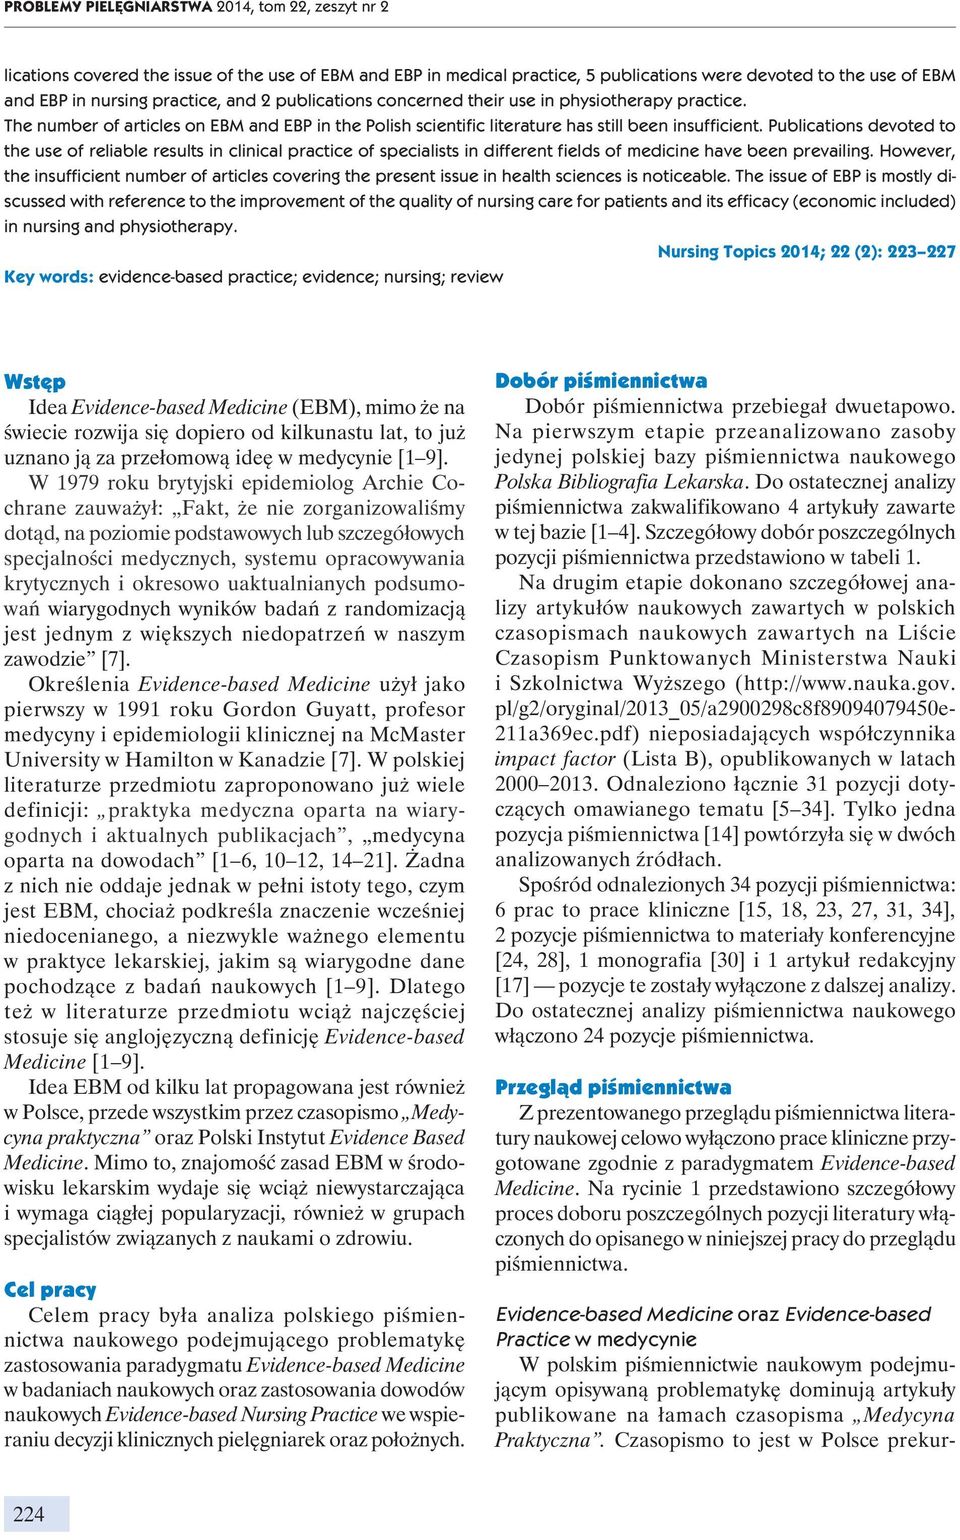 Czasopismo to jest w Polsce prekurlications covered the issue of the use of EBM and EBP in medical practice, 5 publications were devoted to the use of EBM and EBP in nursing practice, and 2